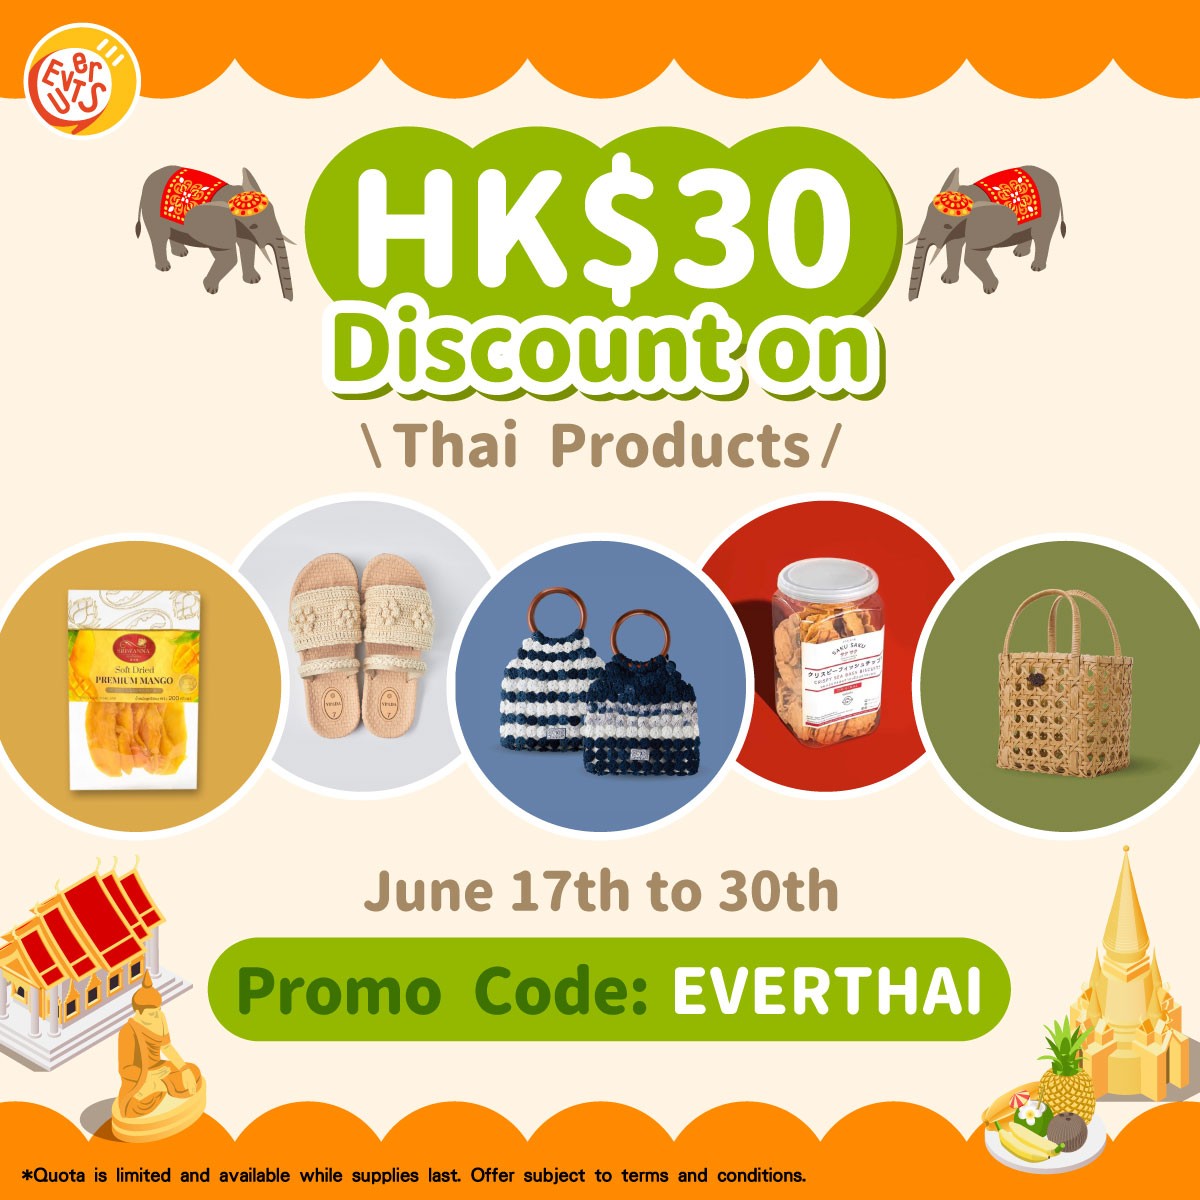 HK$30 Discount on Thai Products